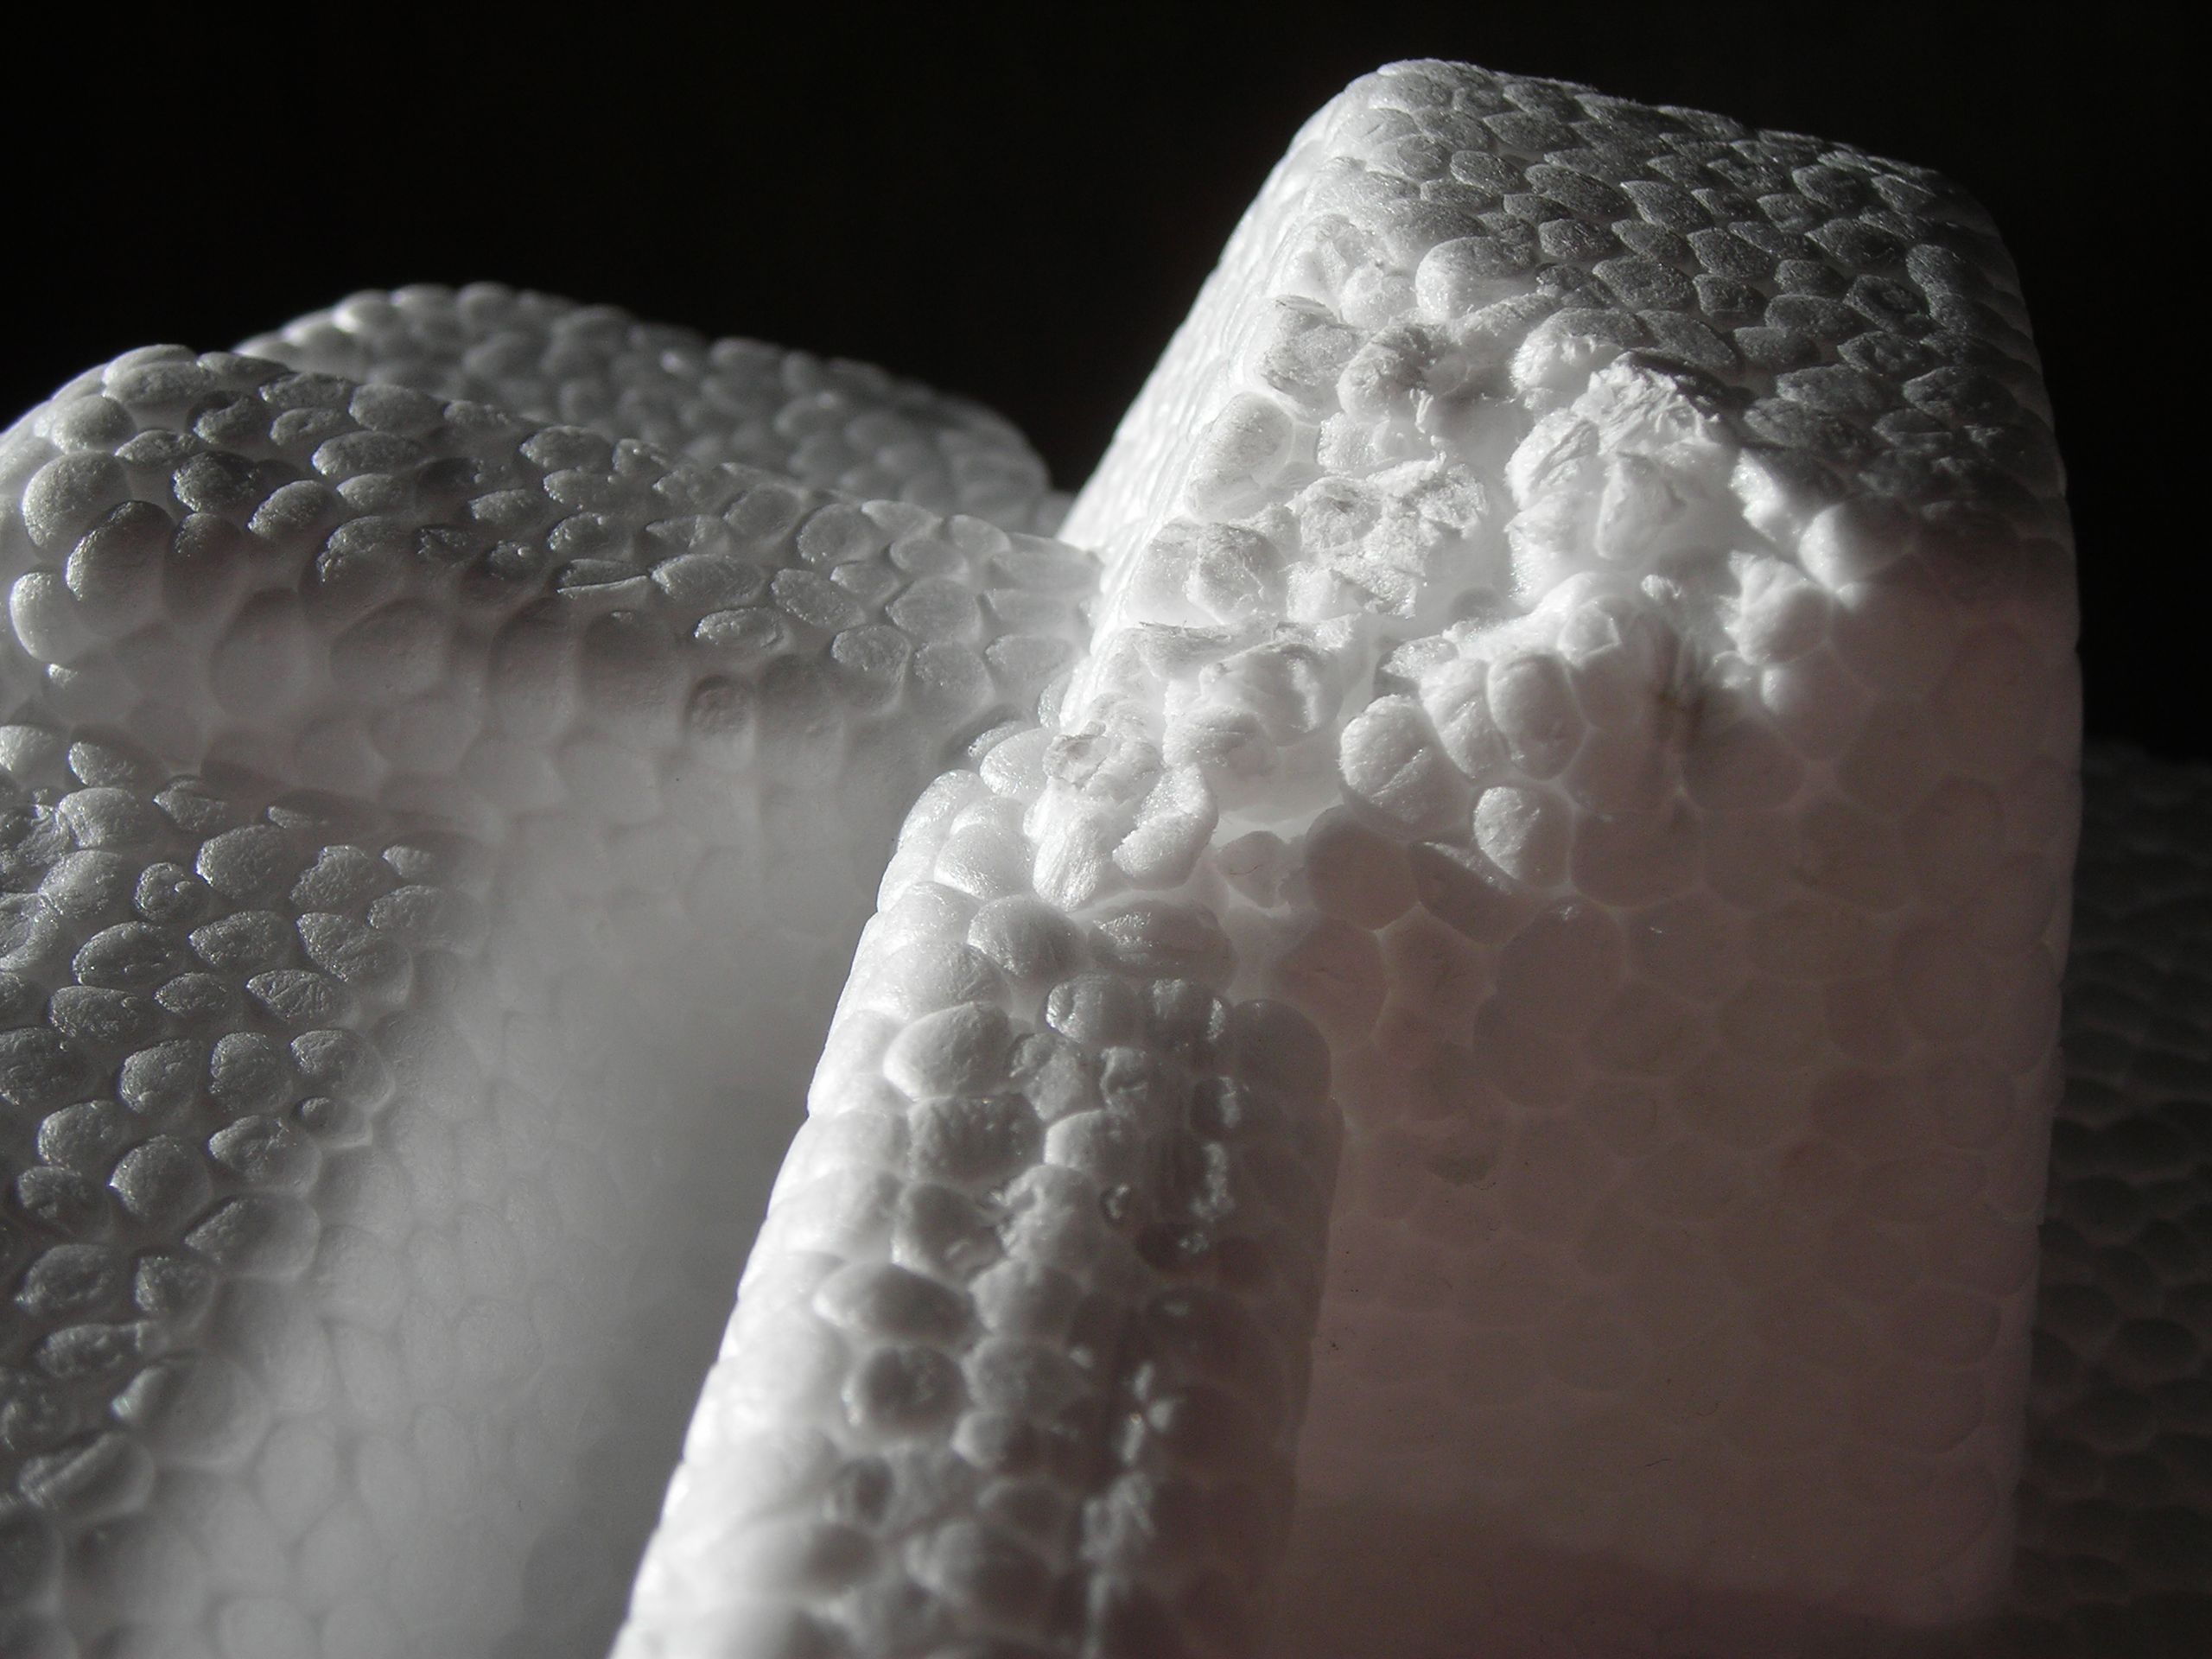 Polystyrene foams are 95-98%. They are good thermal insulators and are therefore often used as not or cold takeaway food and beverage containers.